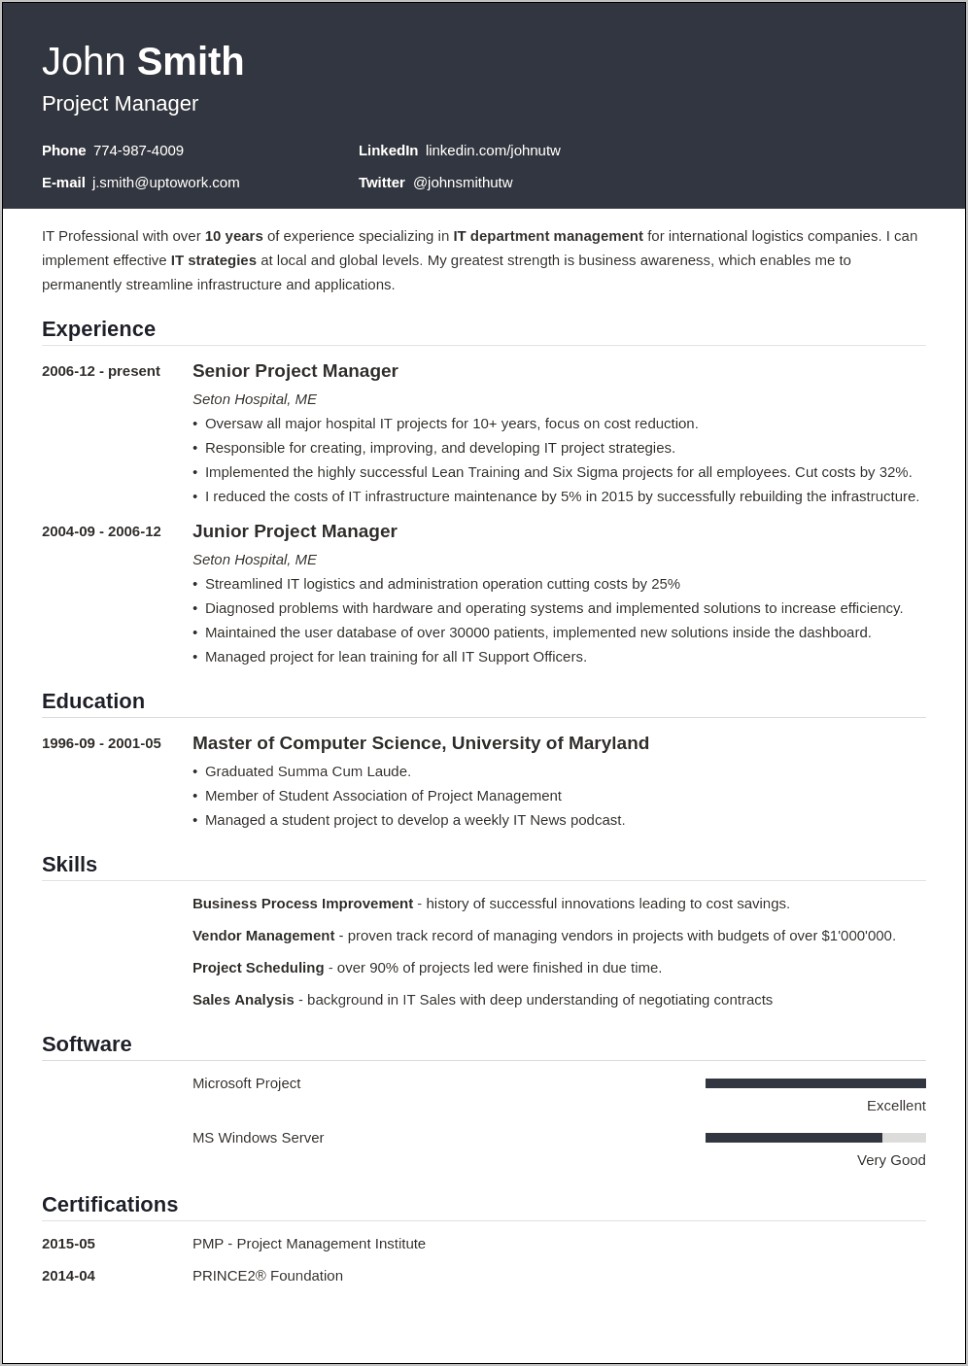 Job Application And Resume Template